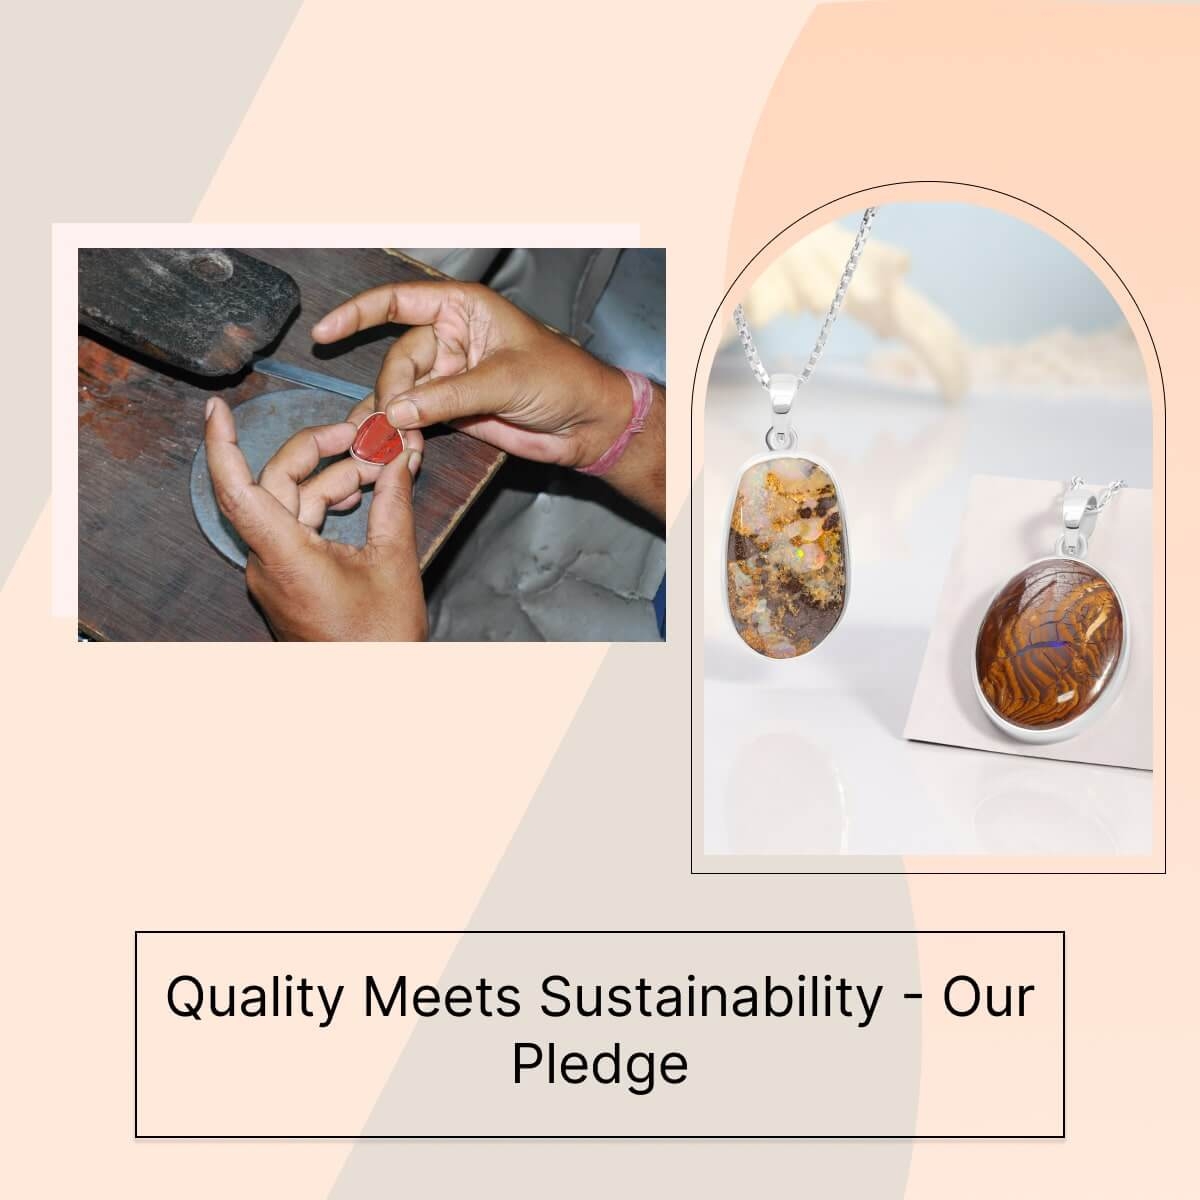 Commitment to Quality and Sustainability